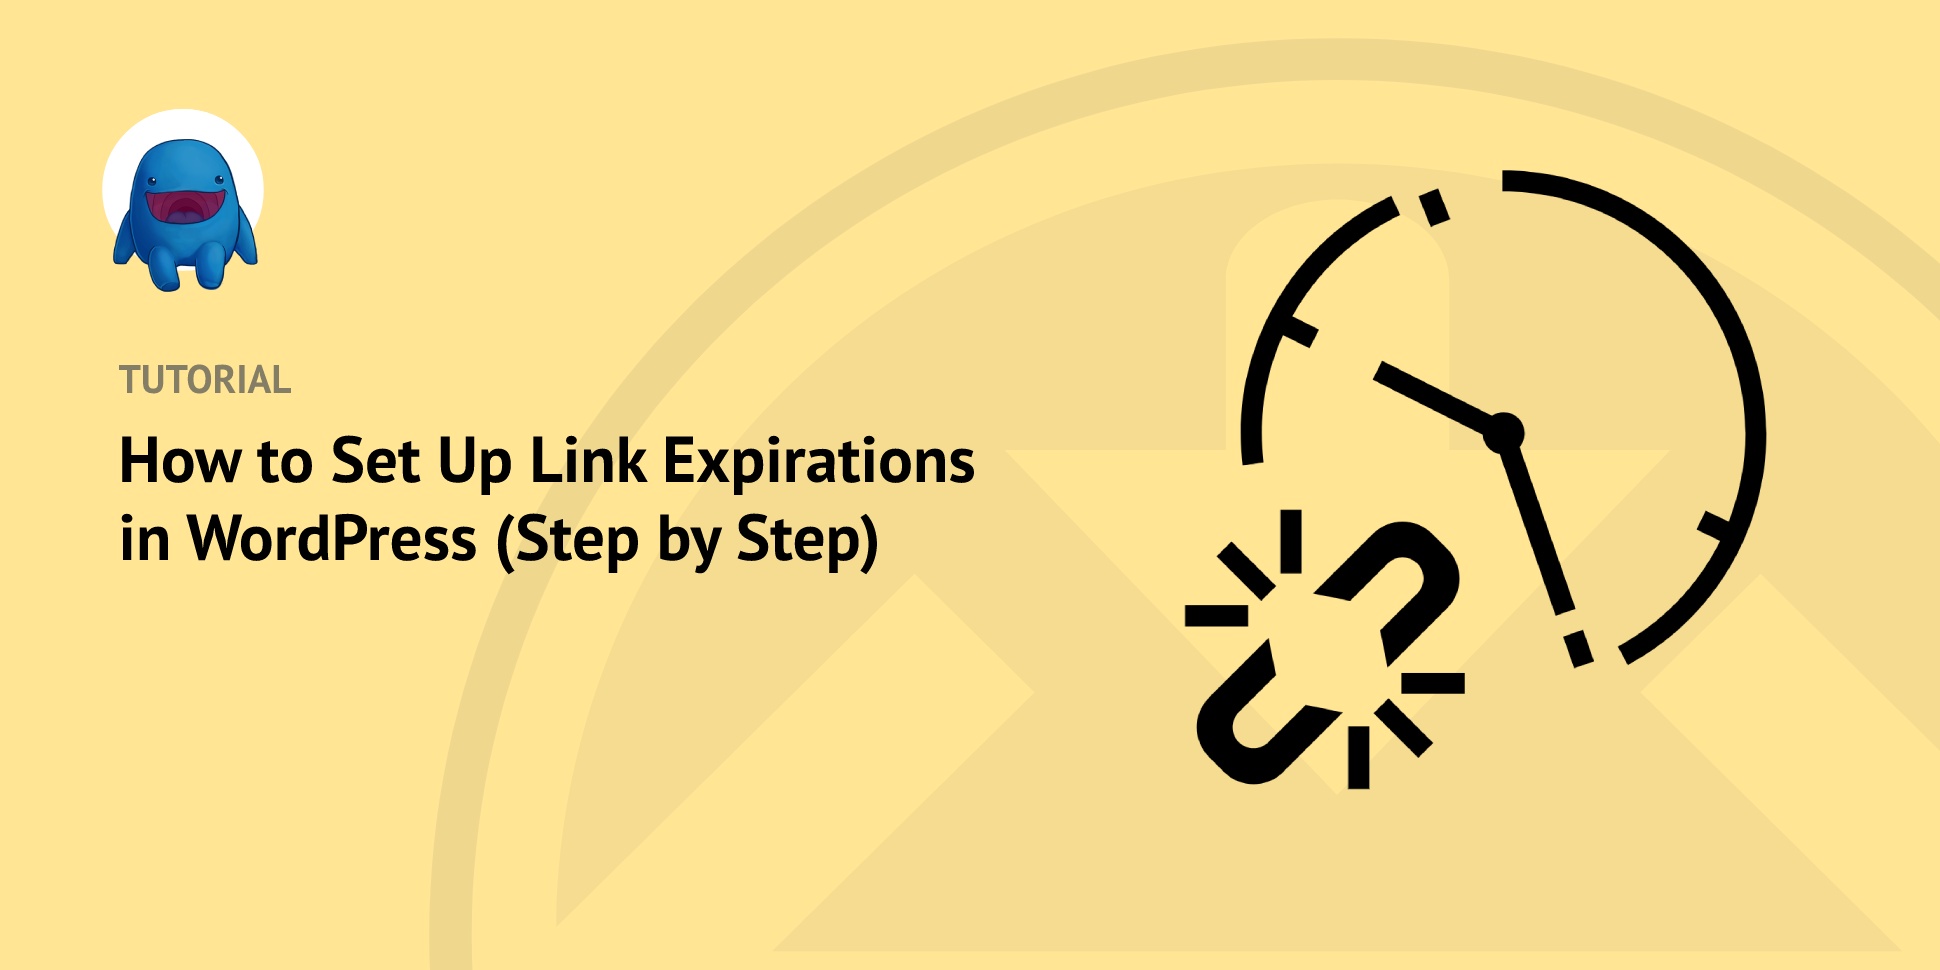 How to Set Up Link Expirations in WordPress